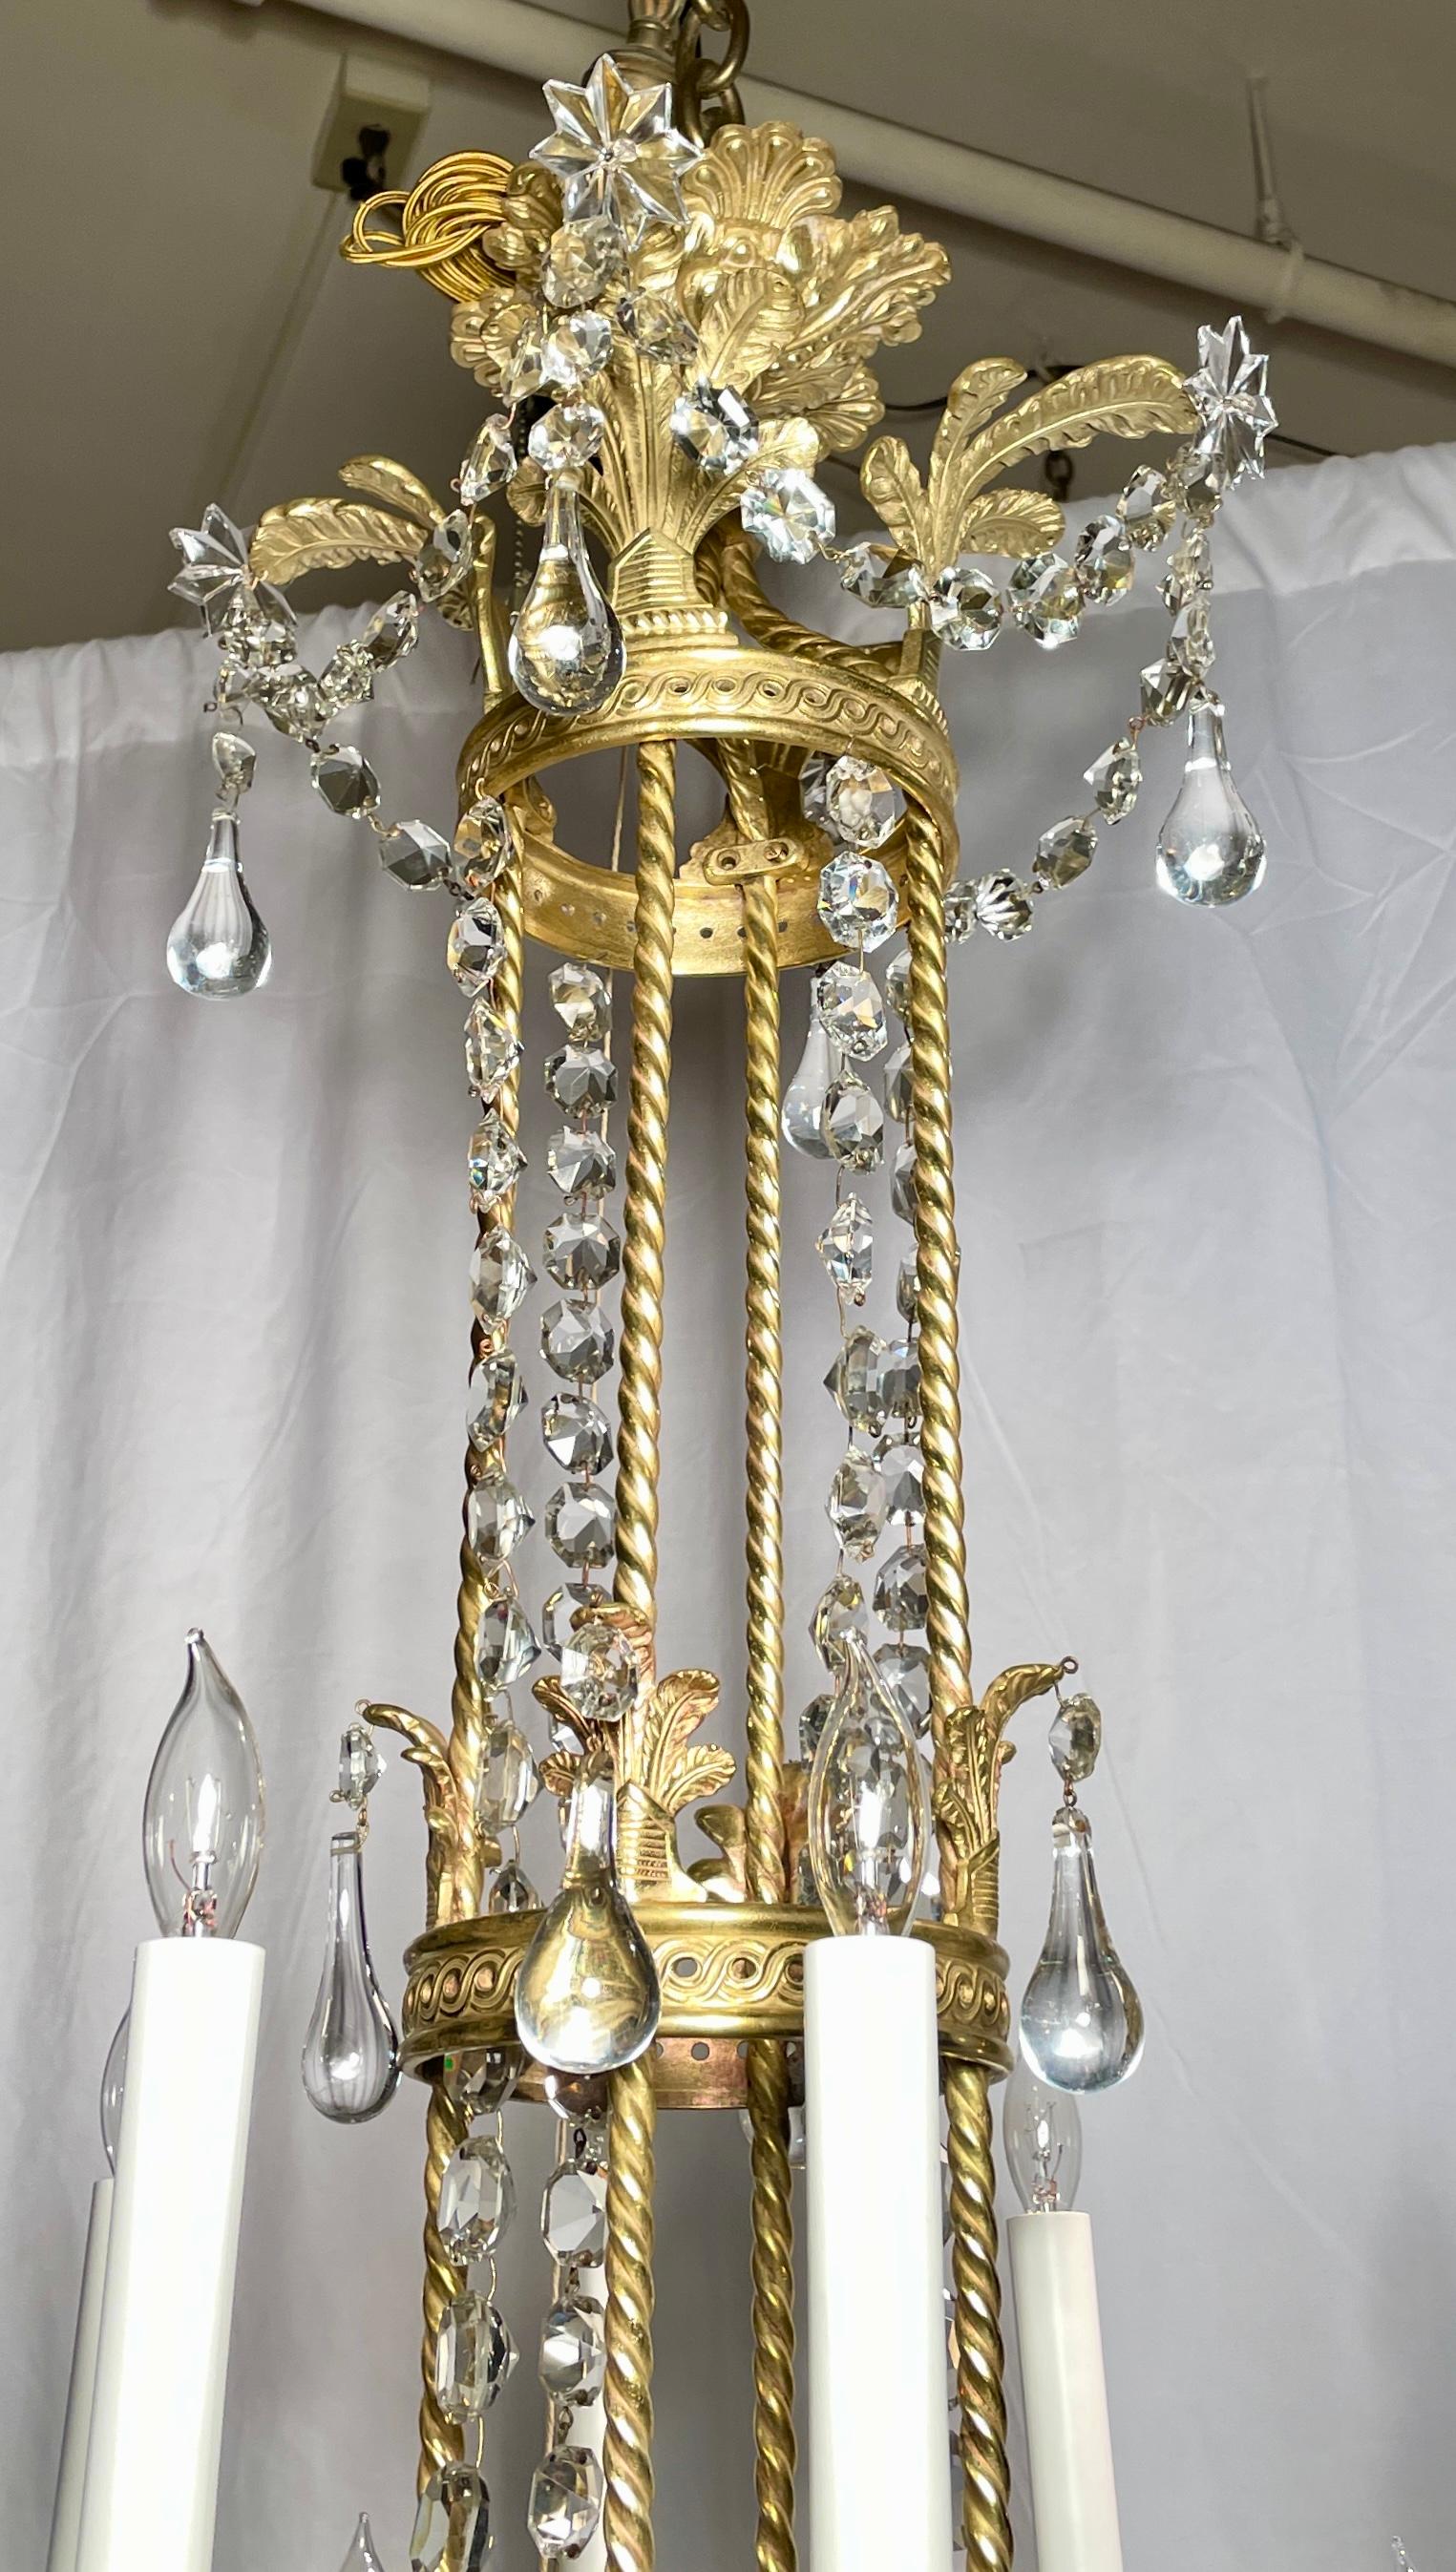 Antique French Baccarat Crystal & Bronze D'ore Chandelier, circa 1890 In Good Condition For Sale In New Orleans, LA